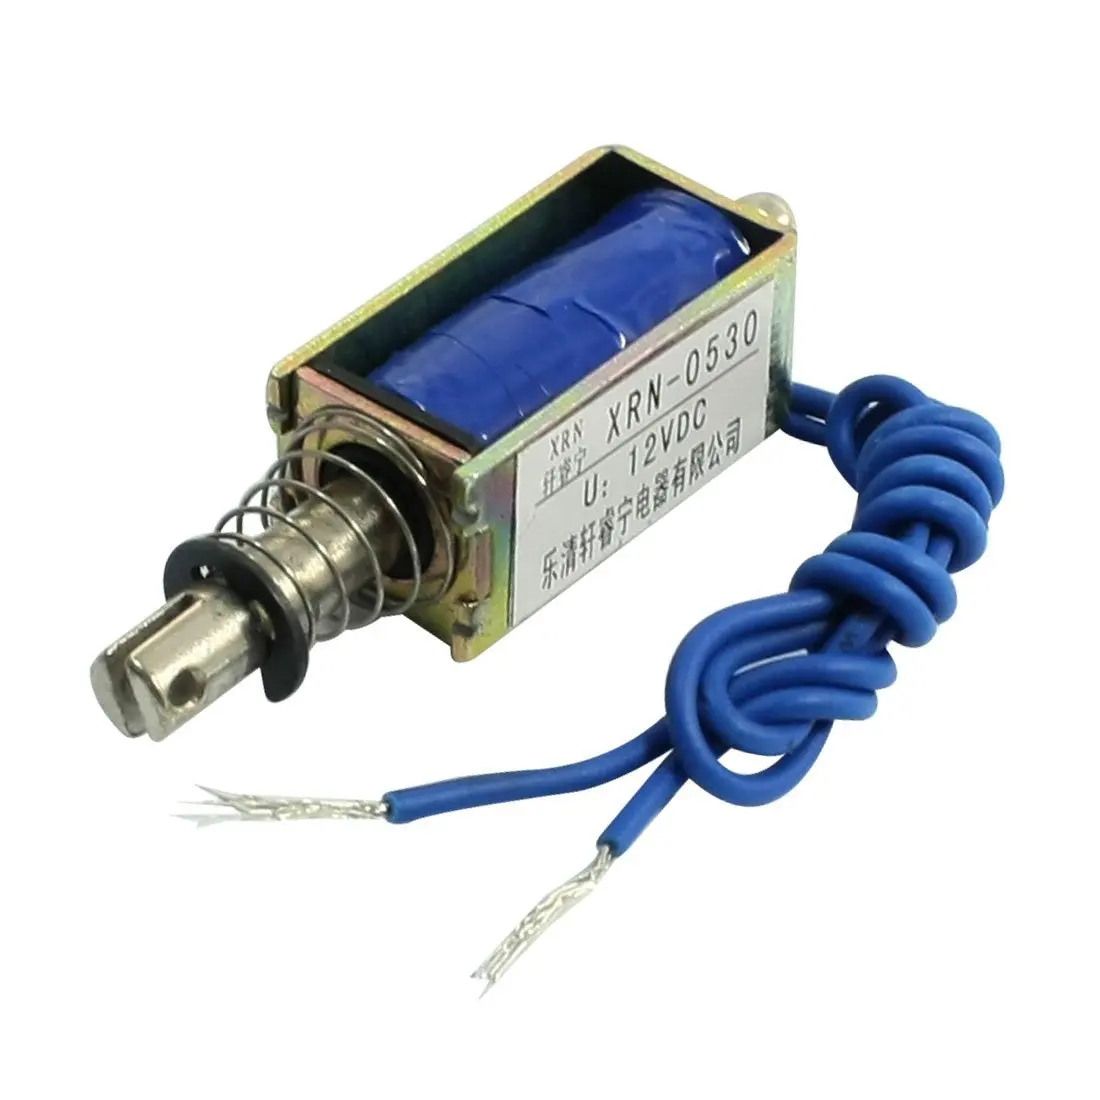 Solenoid electric solenoid type push / pull 10 mm DC 12 V 2.1 kg force Dropshipping